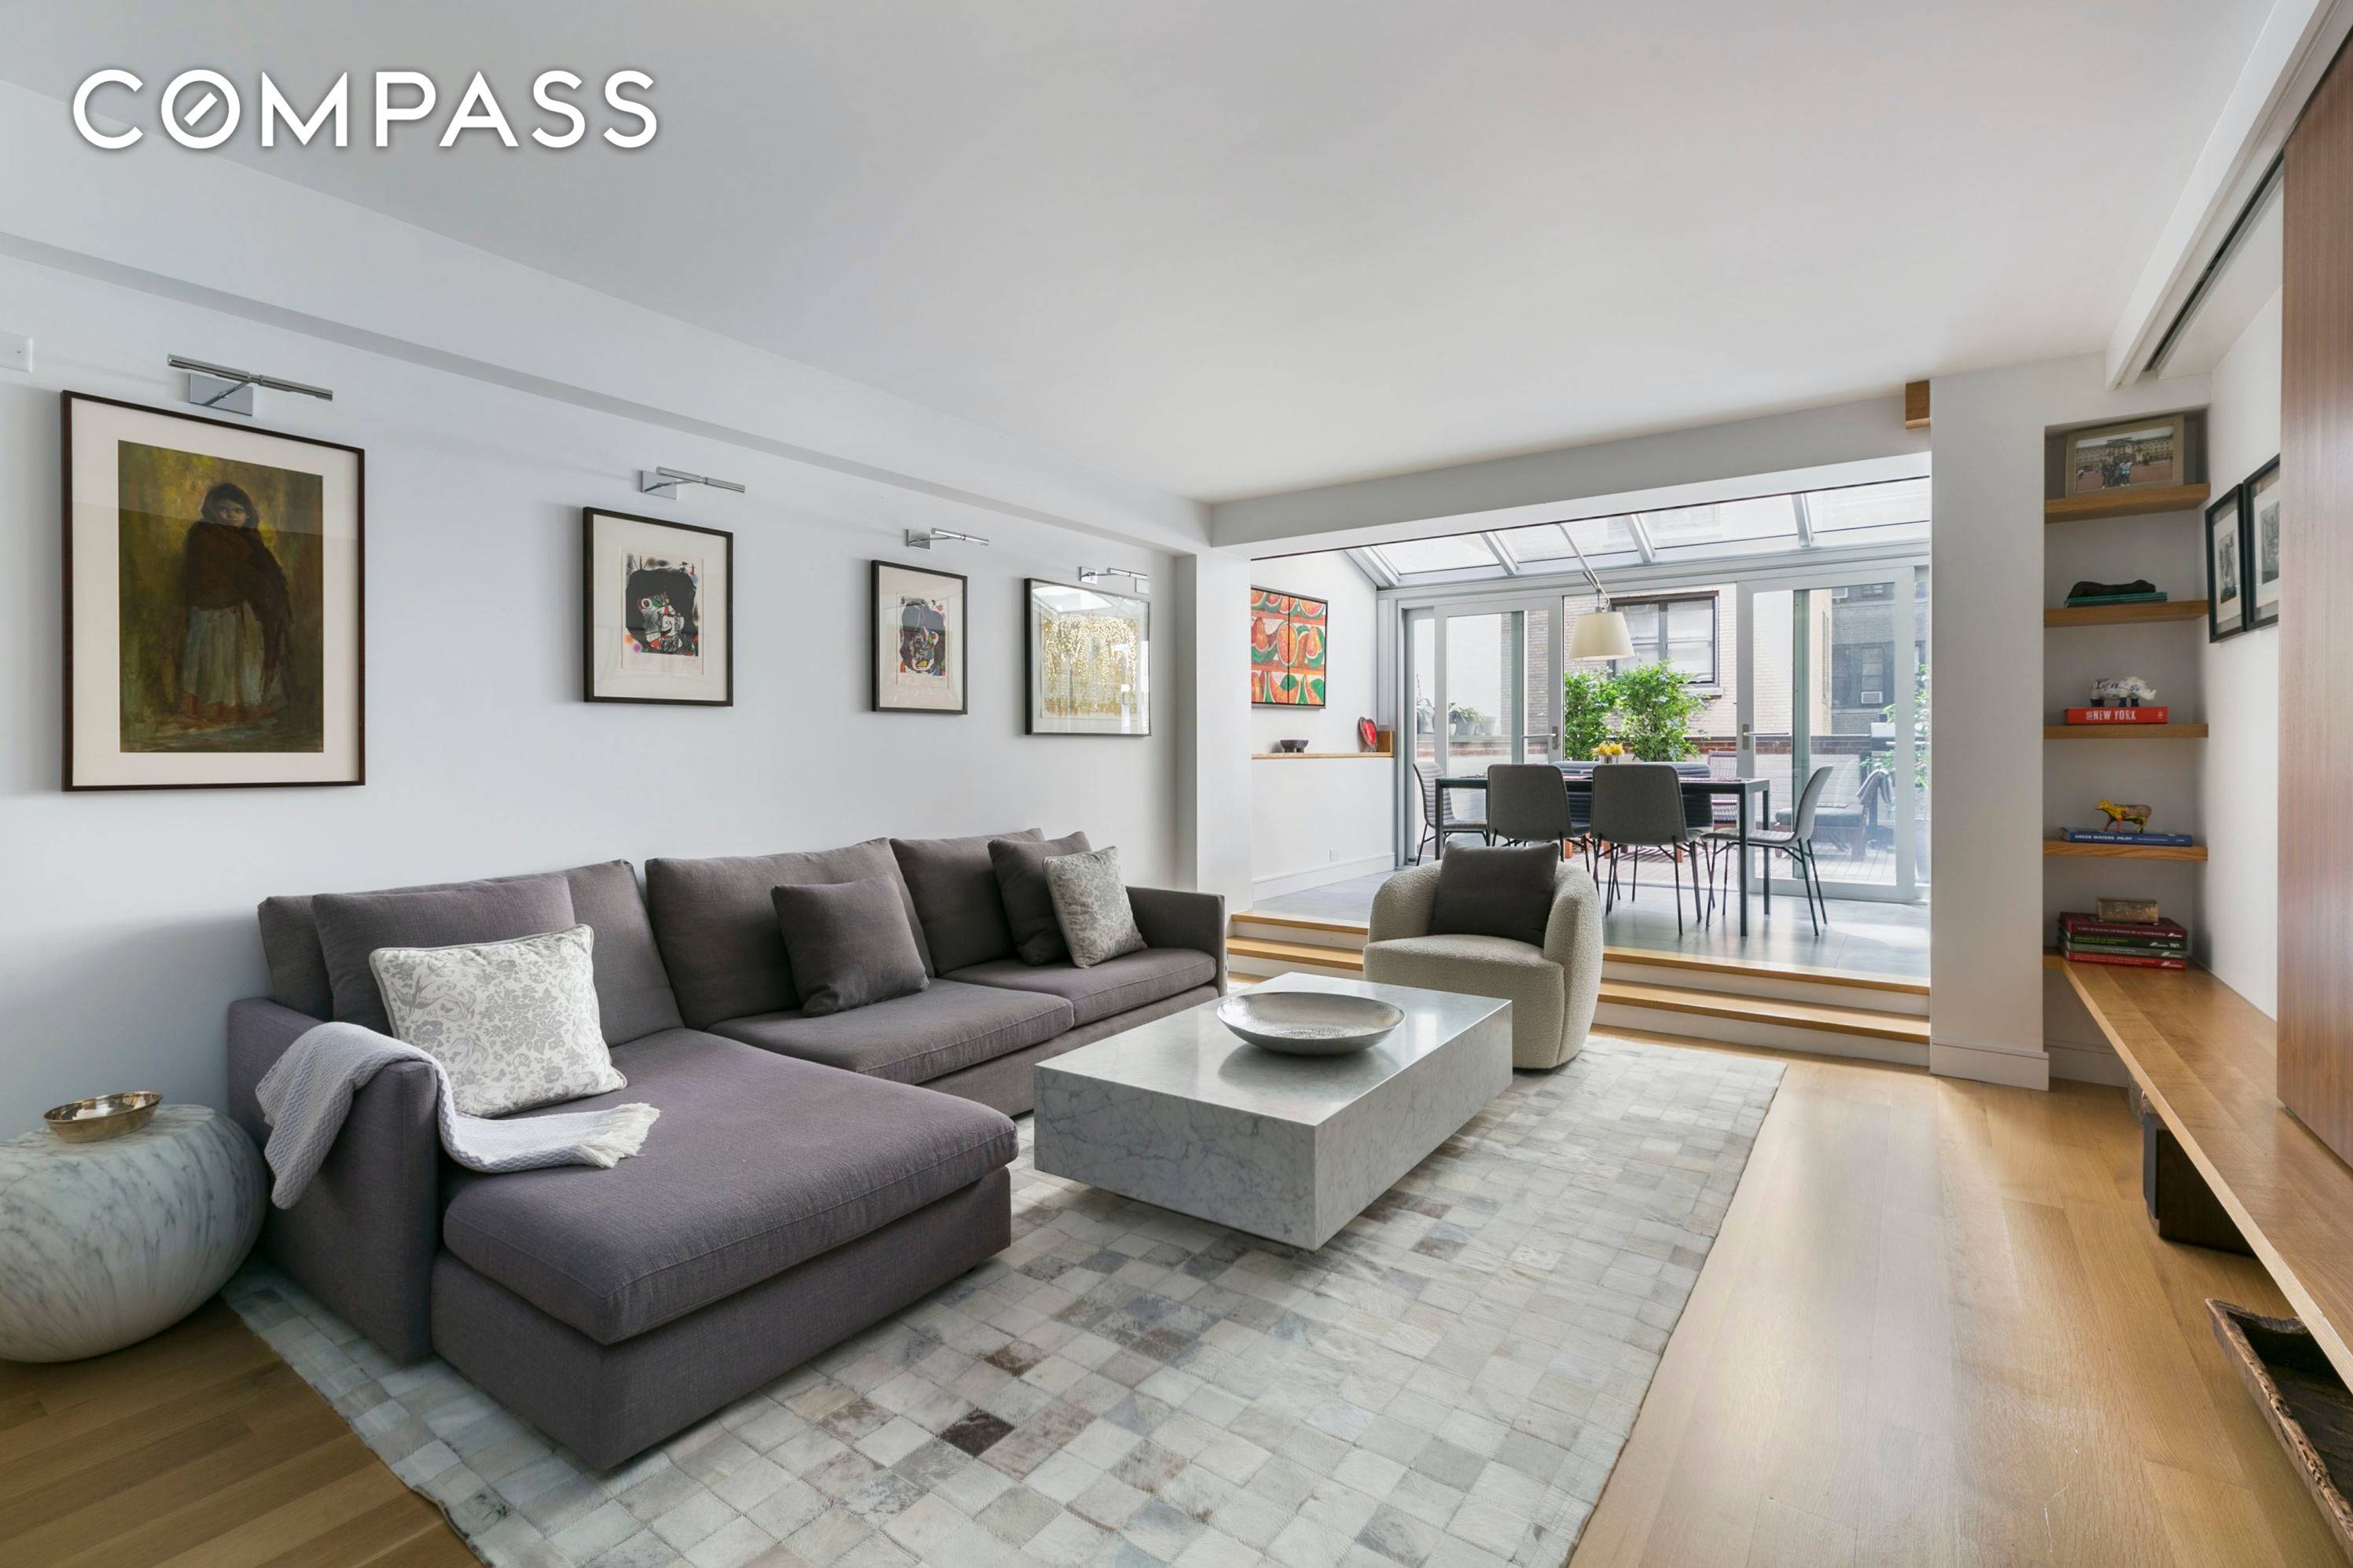 Impeccable design meets functionality in this mint condition three bedroom, three bathroom condominium with Central Park as its front yard.